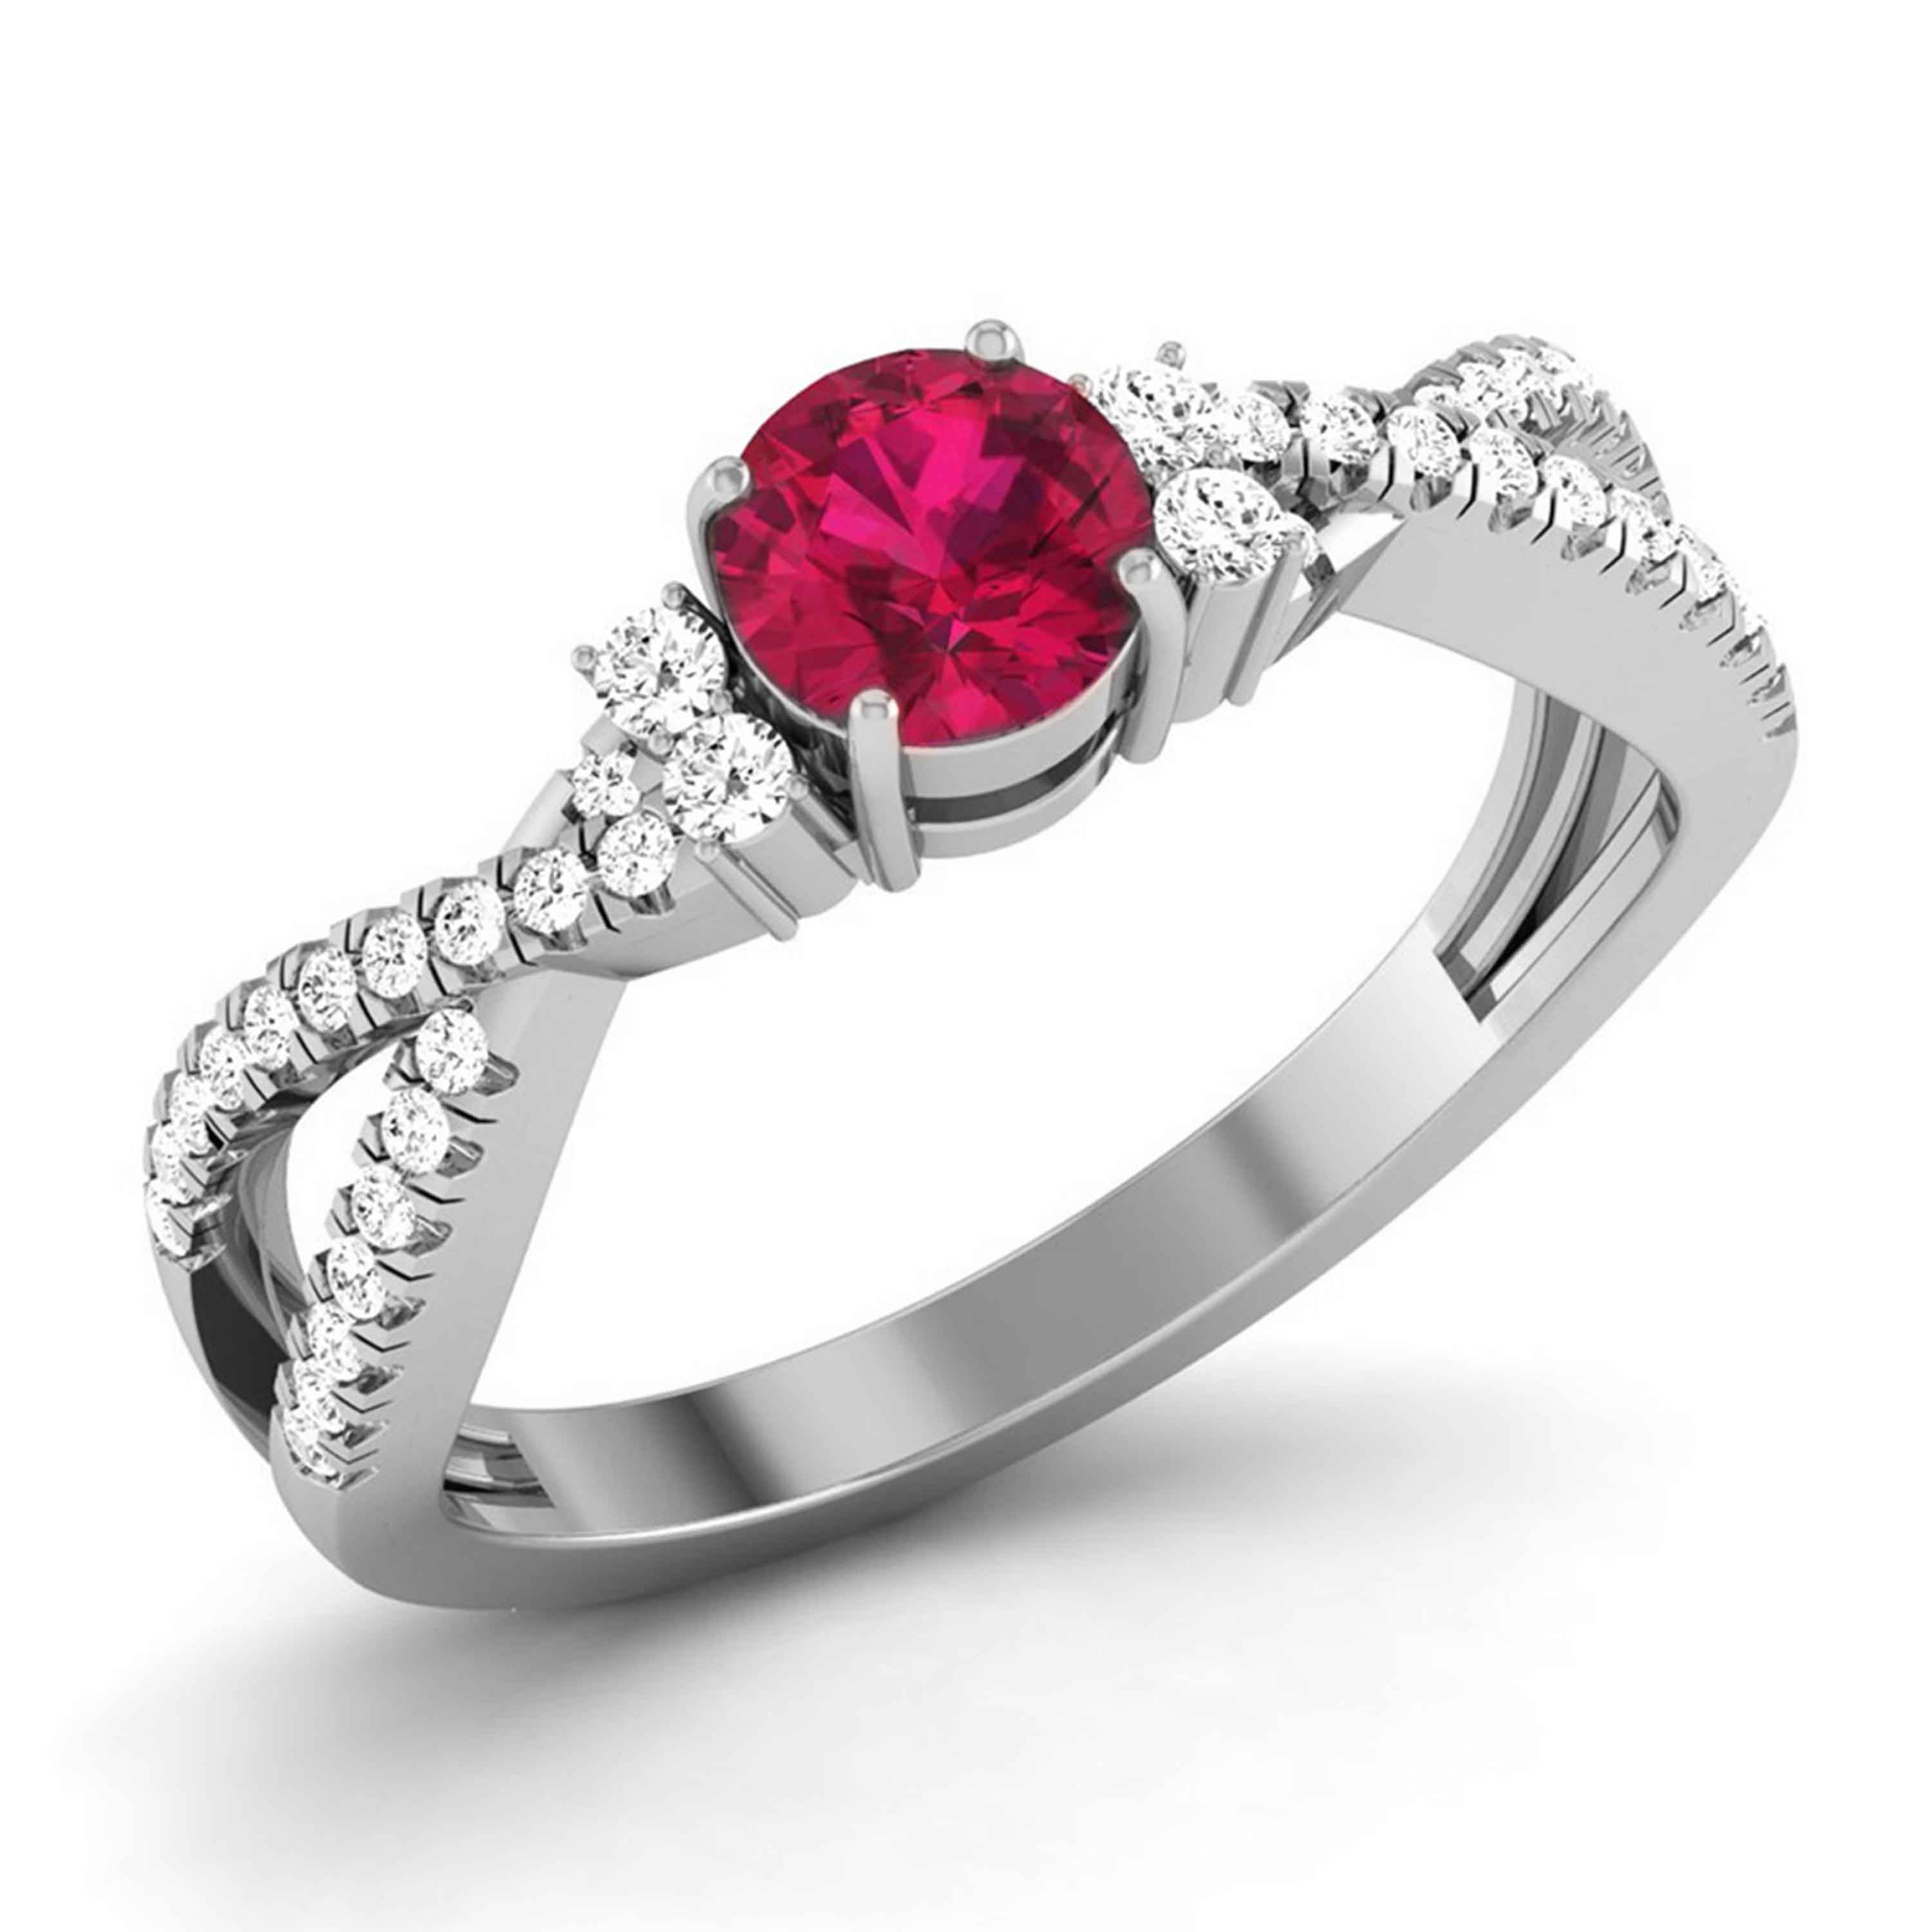 Colours of Love Platinum 3.10ct Cushion Cut Ruby Ring Set |